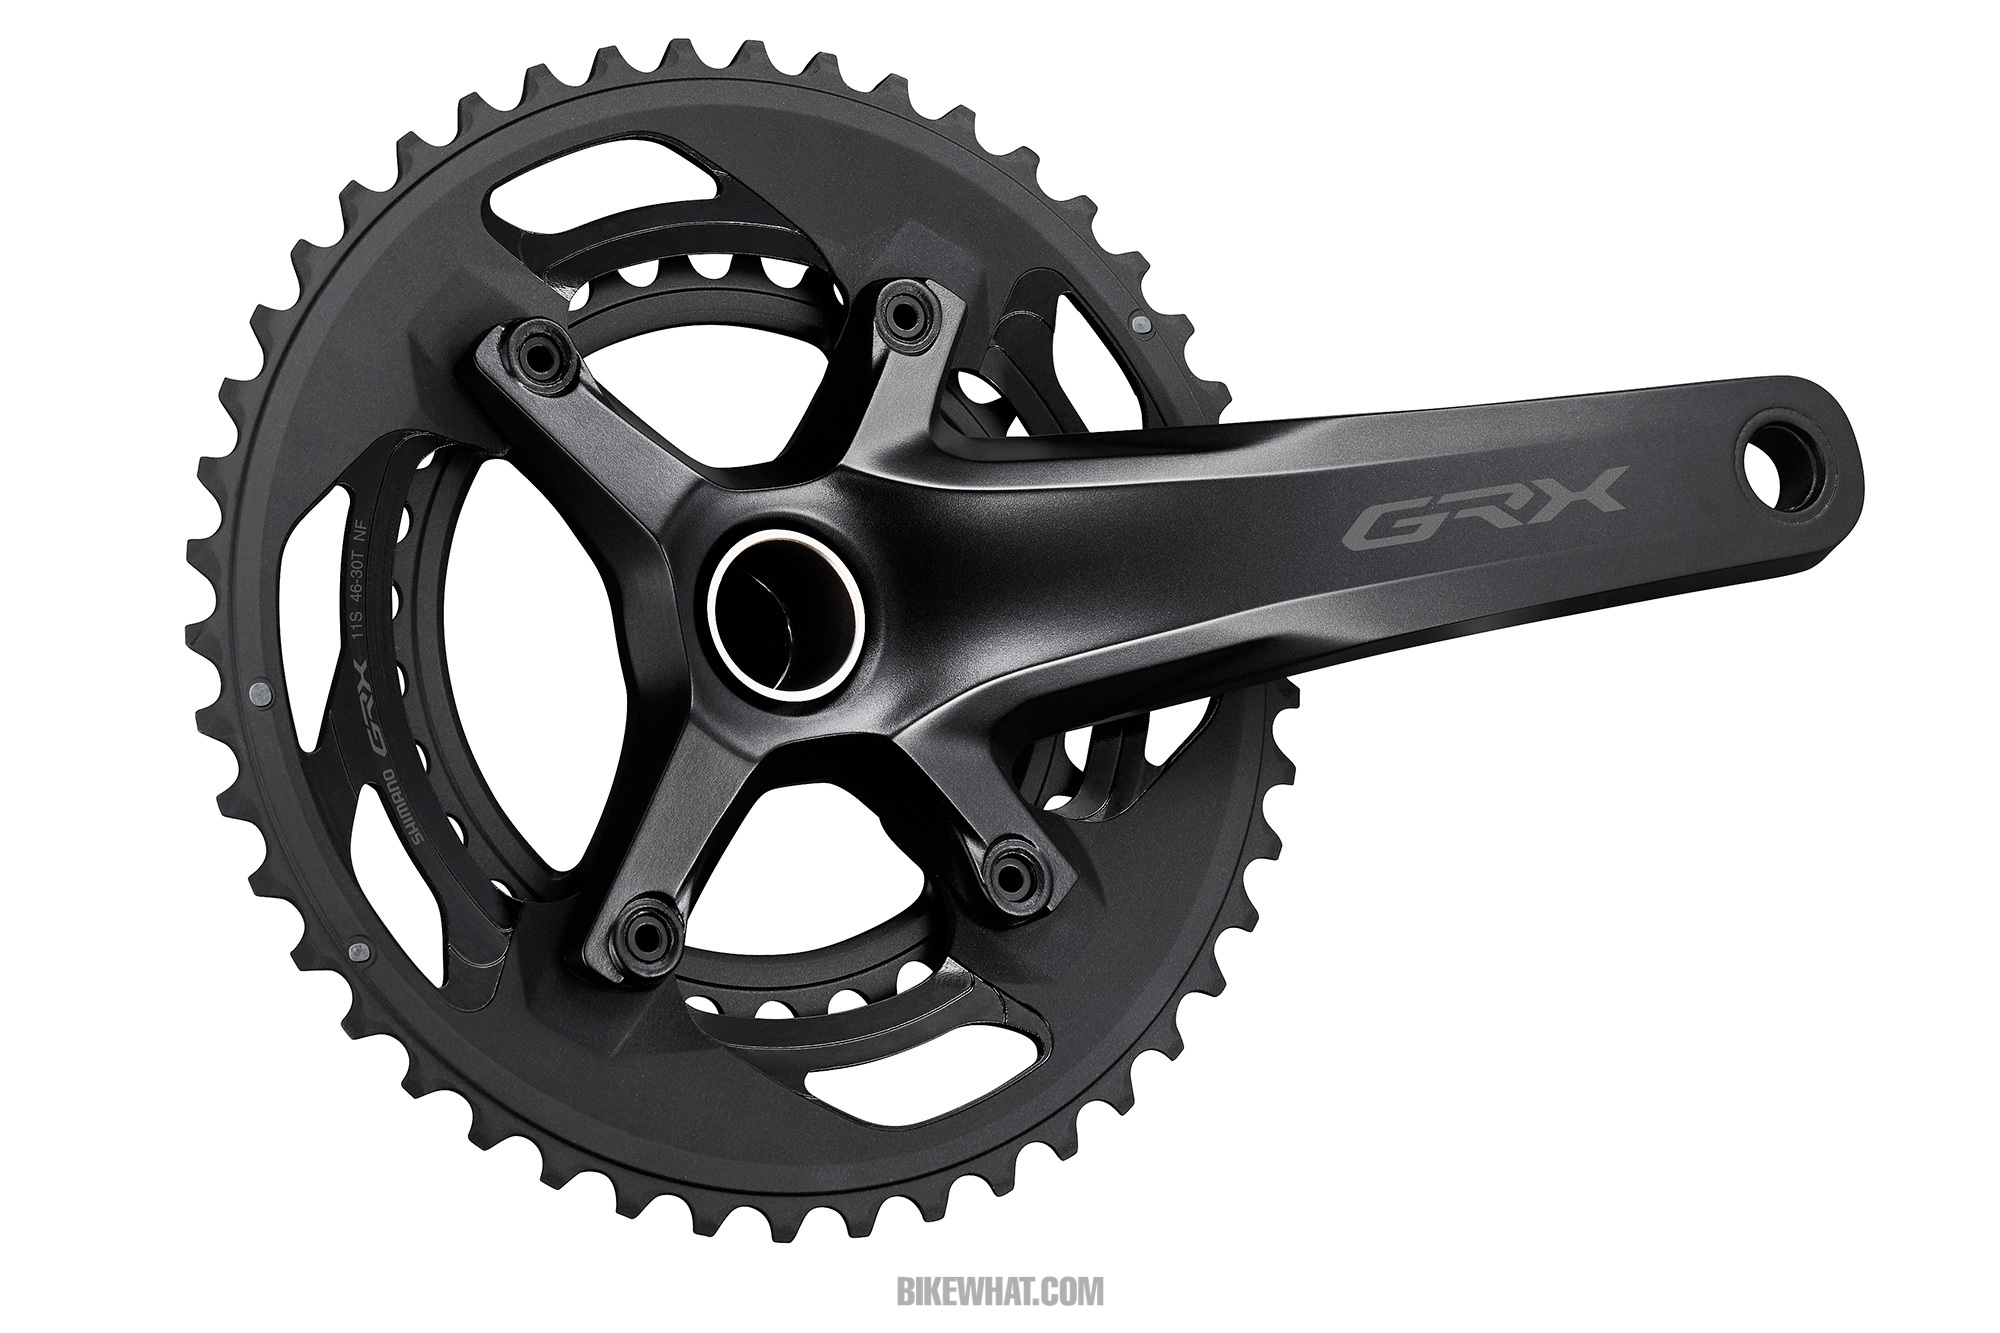 Preview_Shimano_GRX_FC-RX600-11_46-30T.jpg